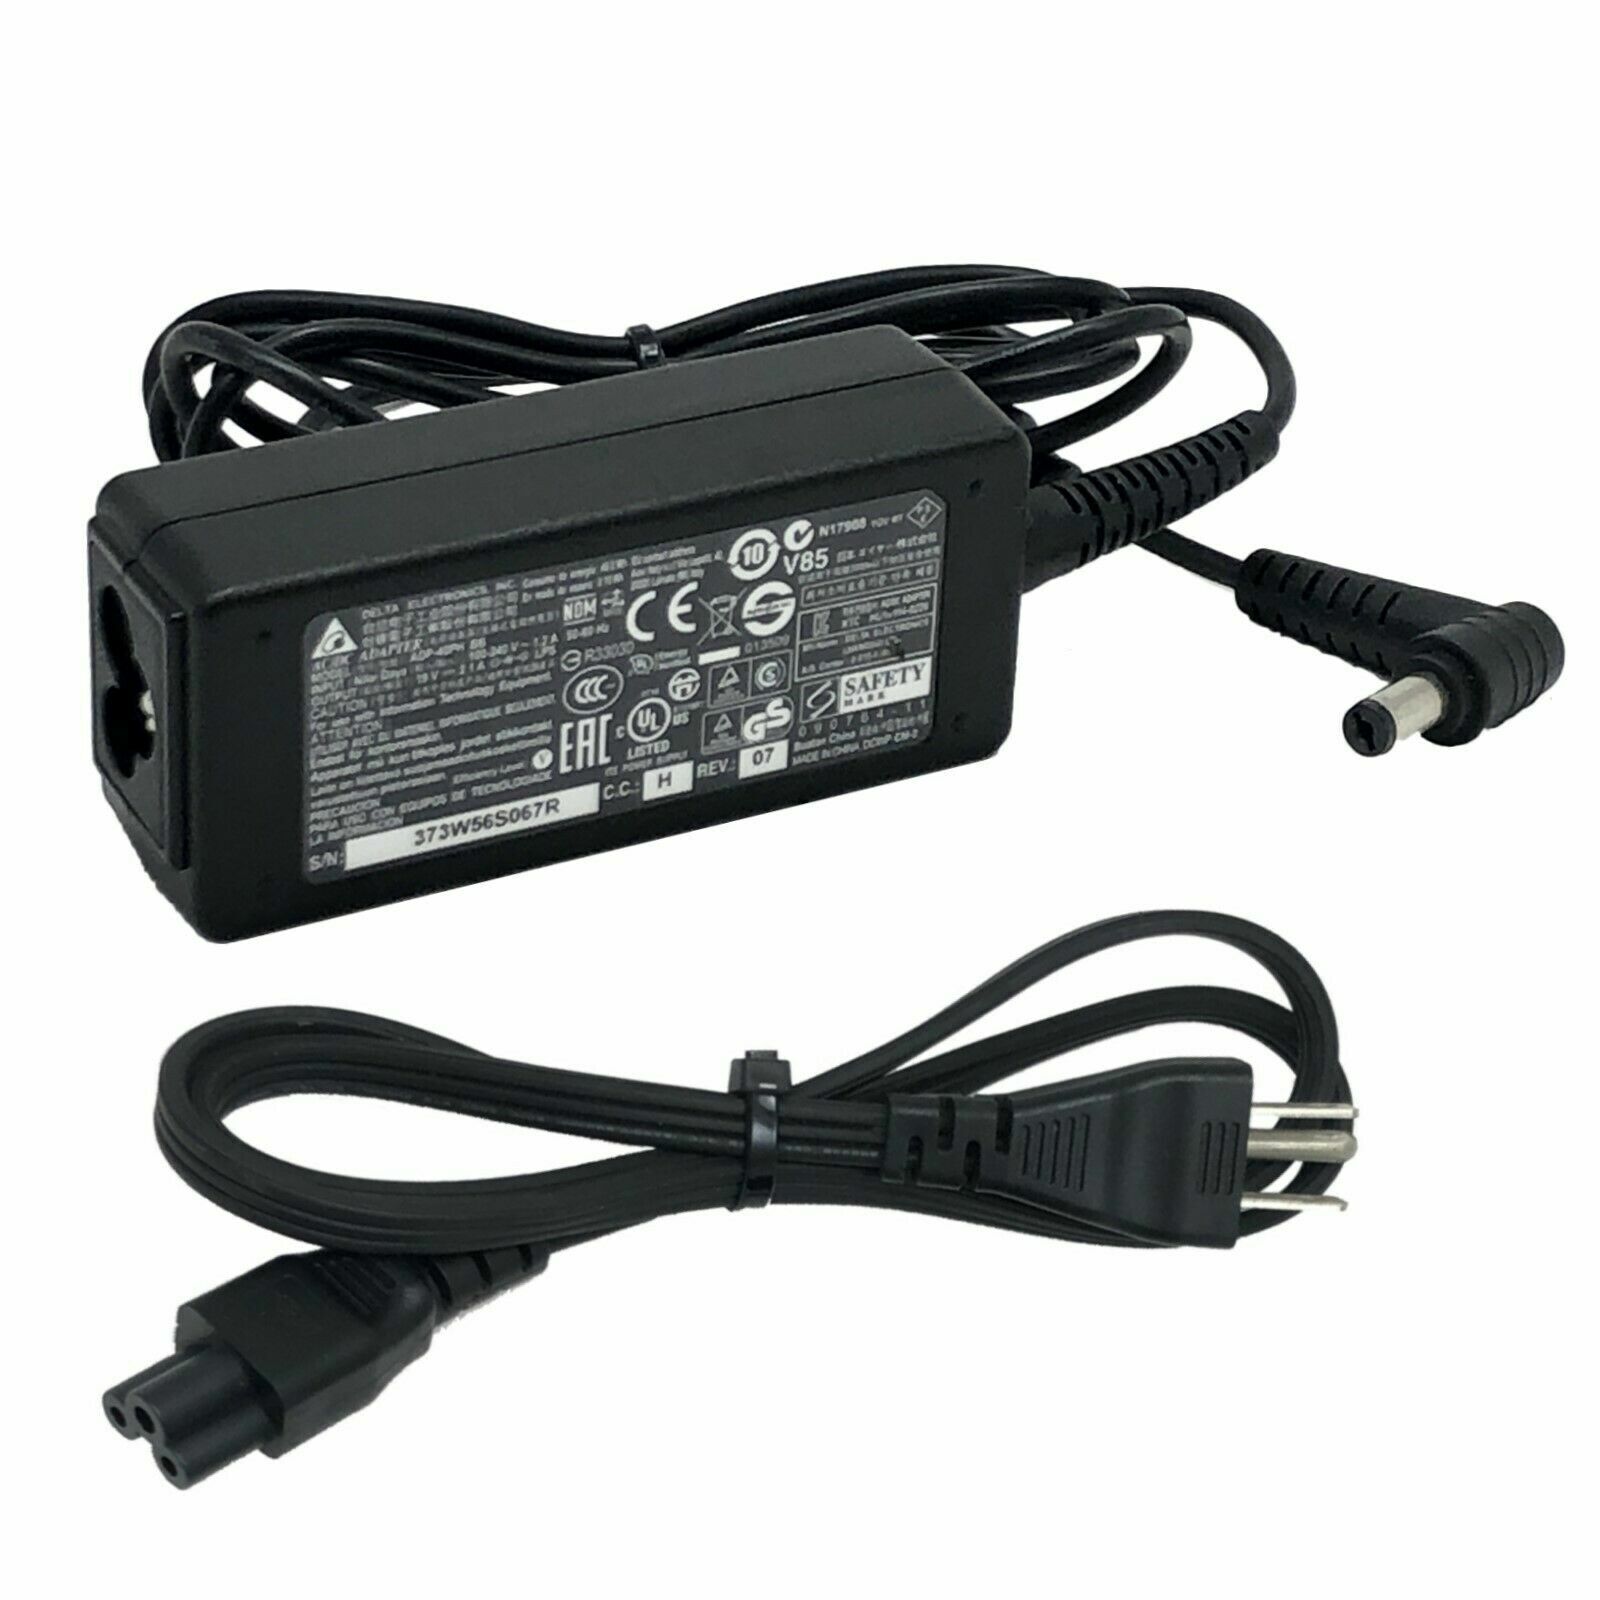 Genuine AC Power Supply Adapter For Acer G226HQL S231HL S181HL LCD Monitor